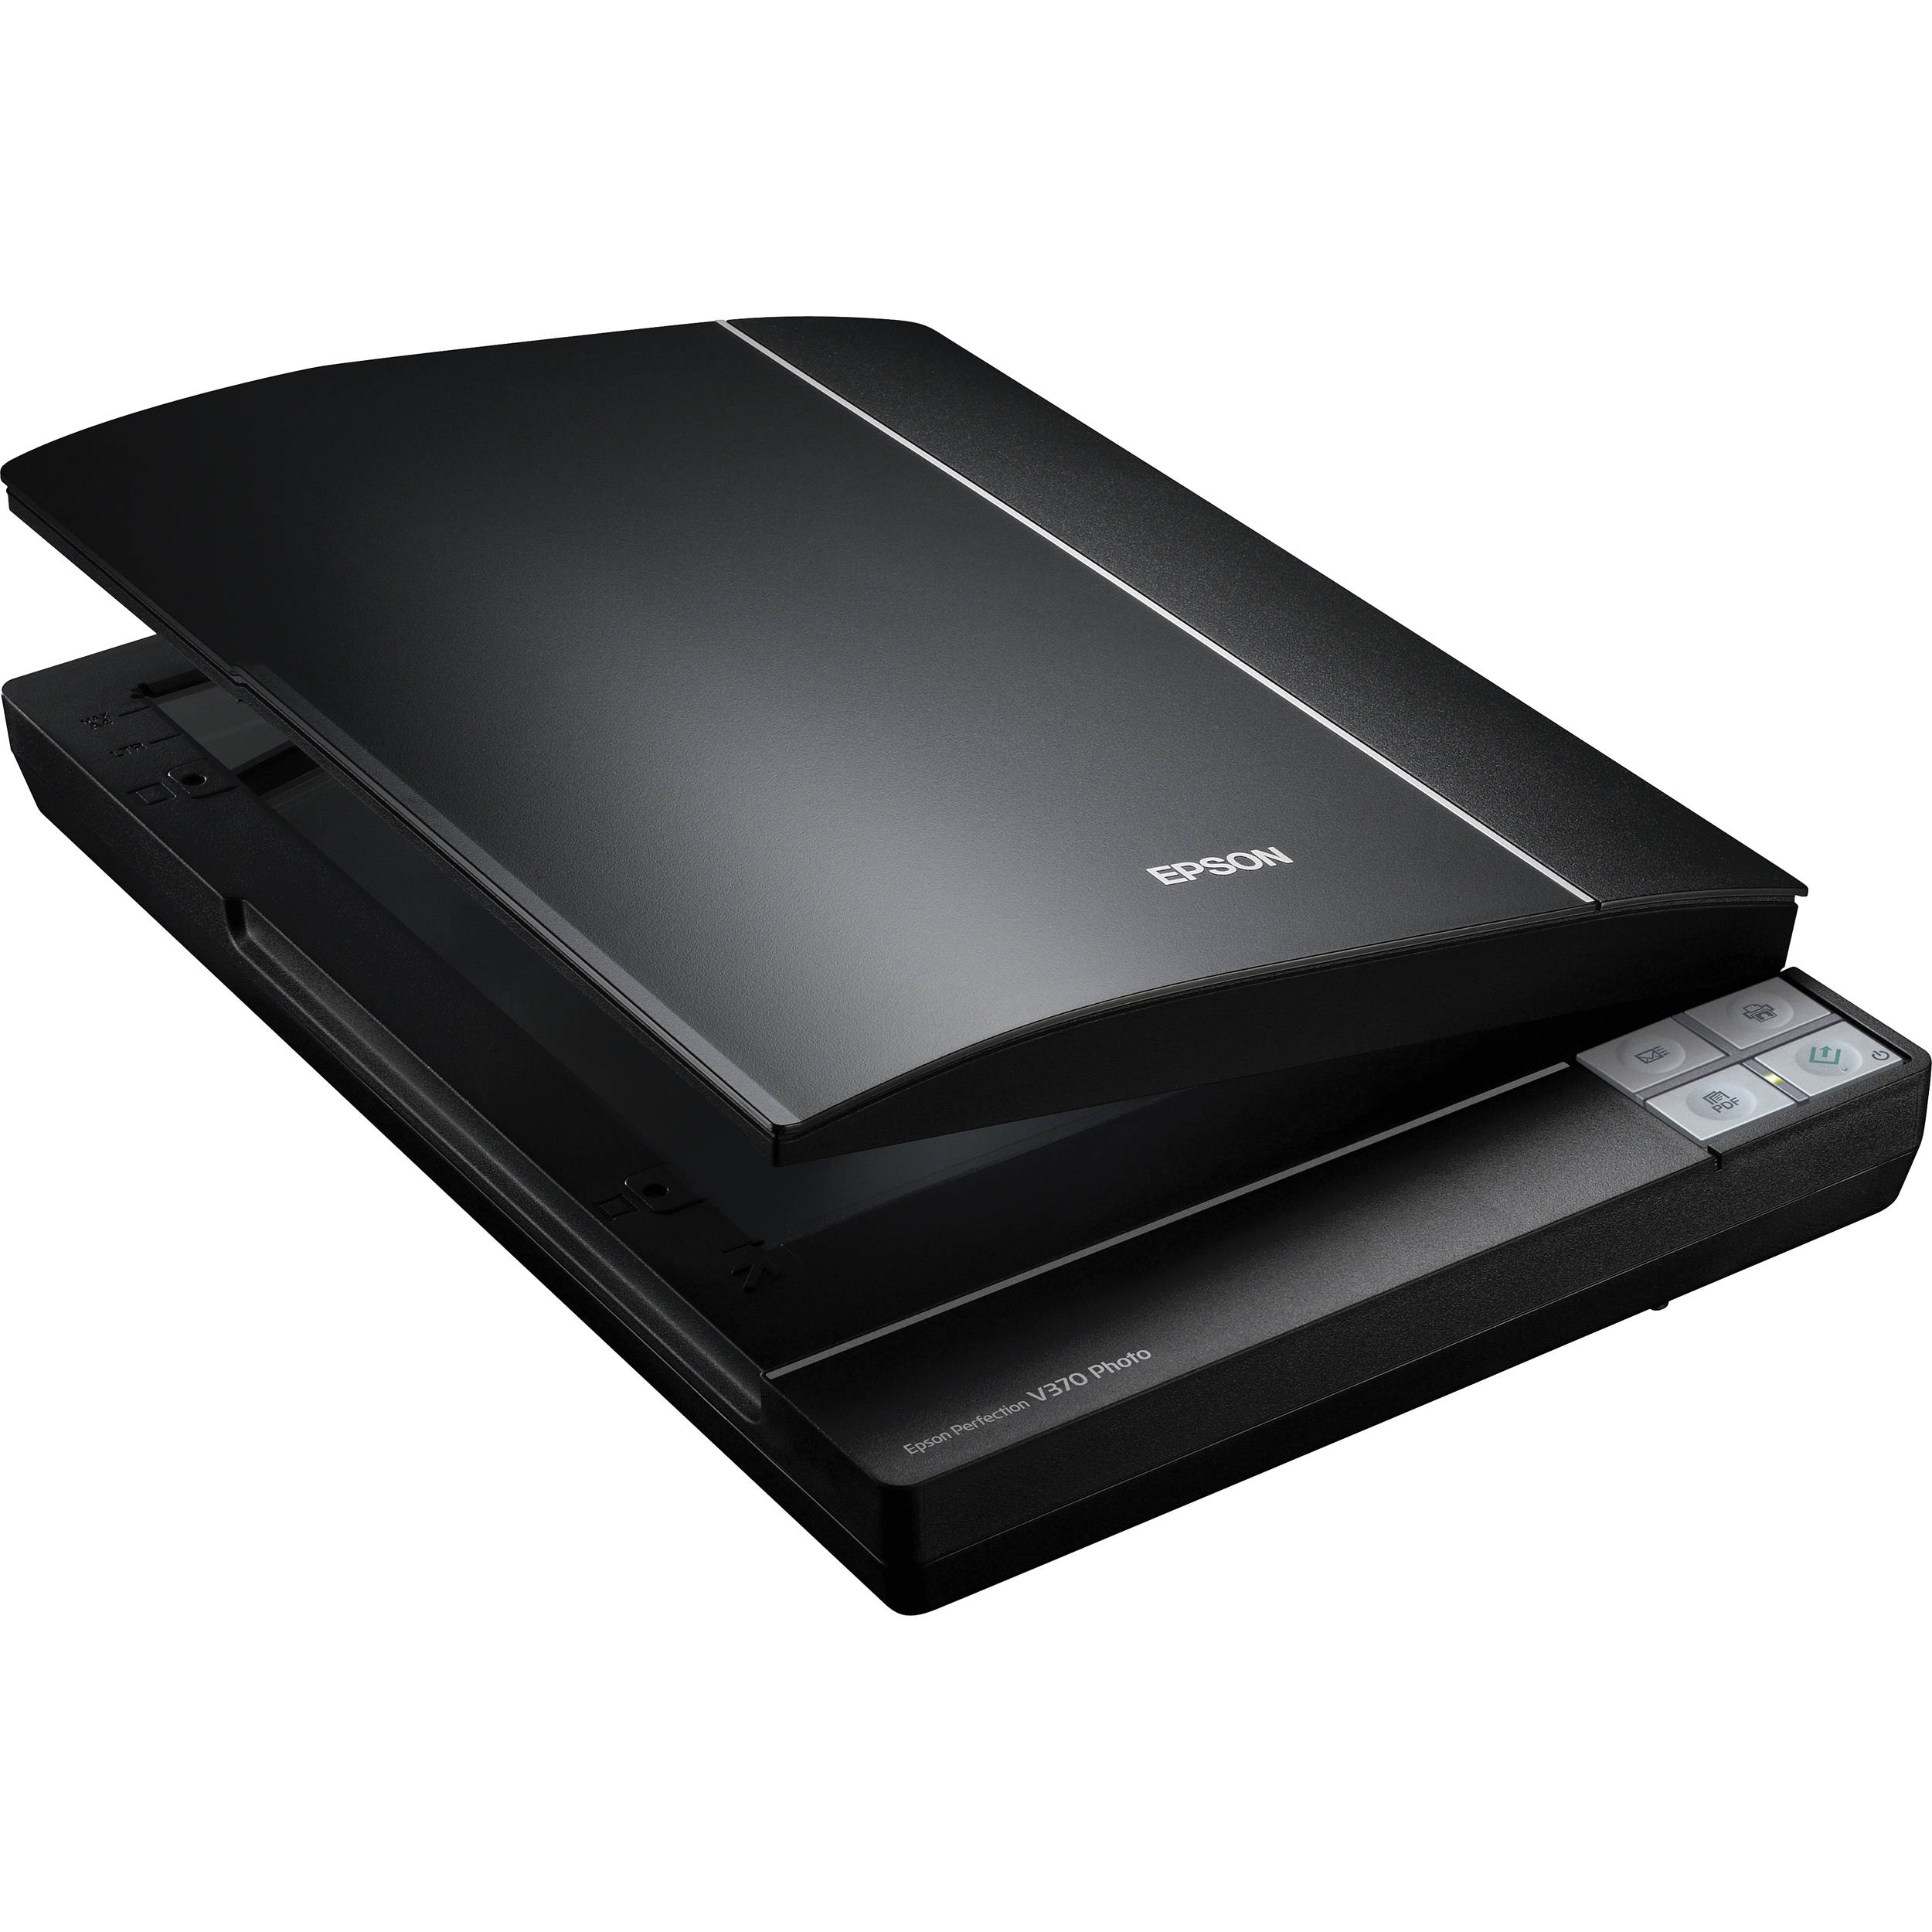 Epson Perfection 1650 Scanner Software Mac